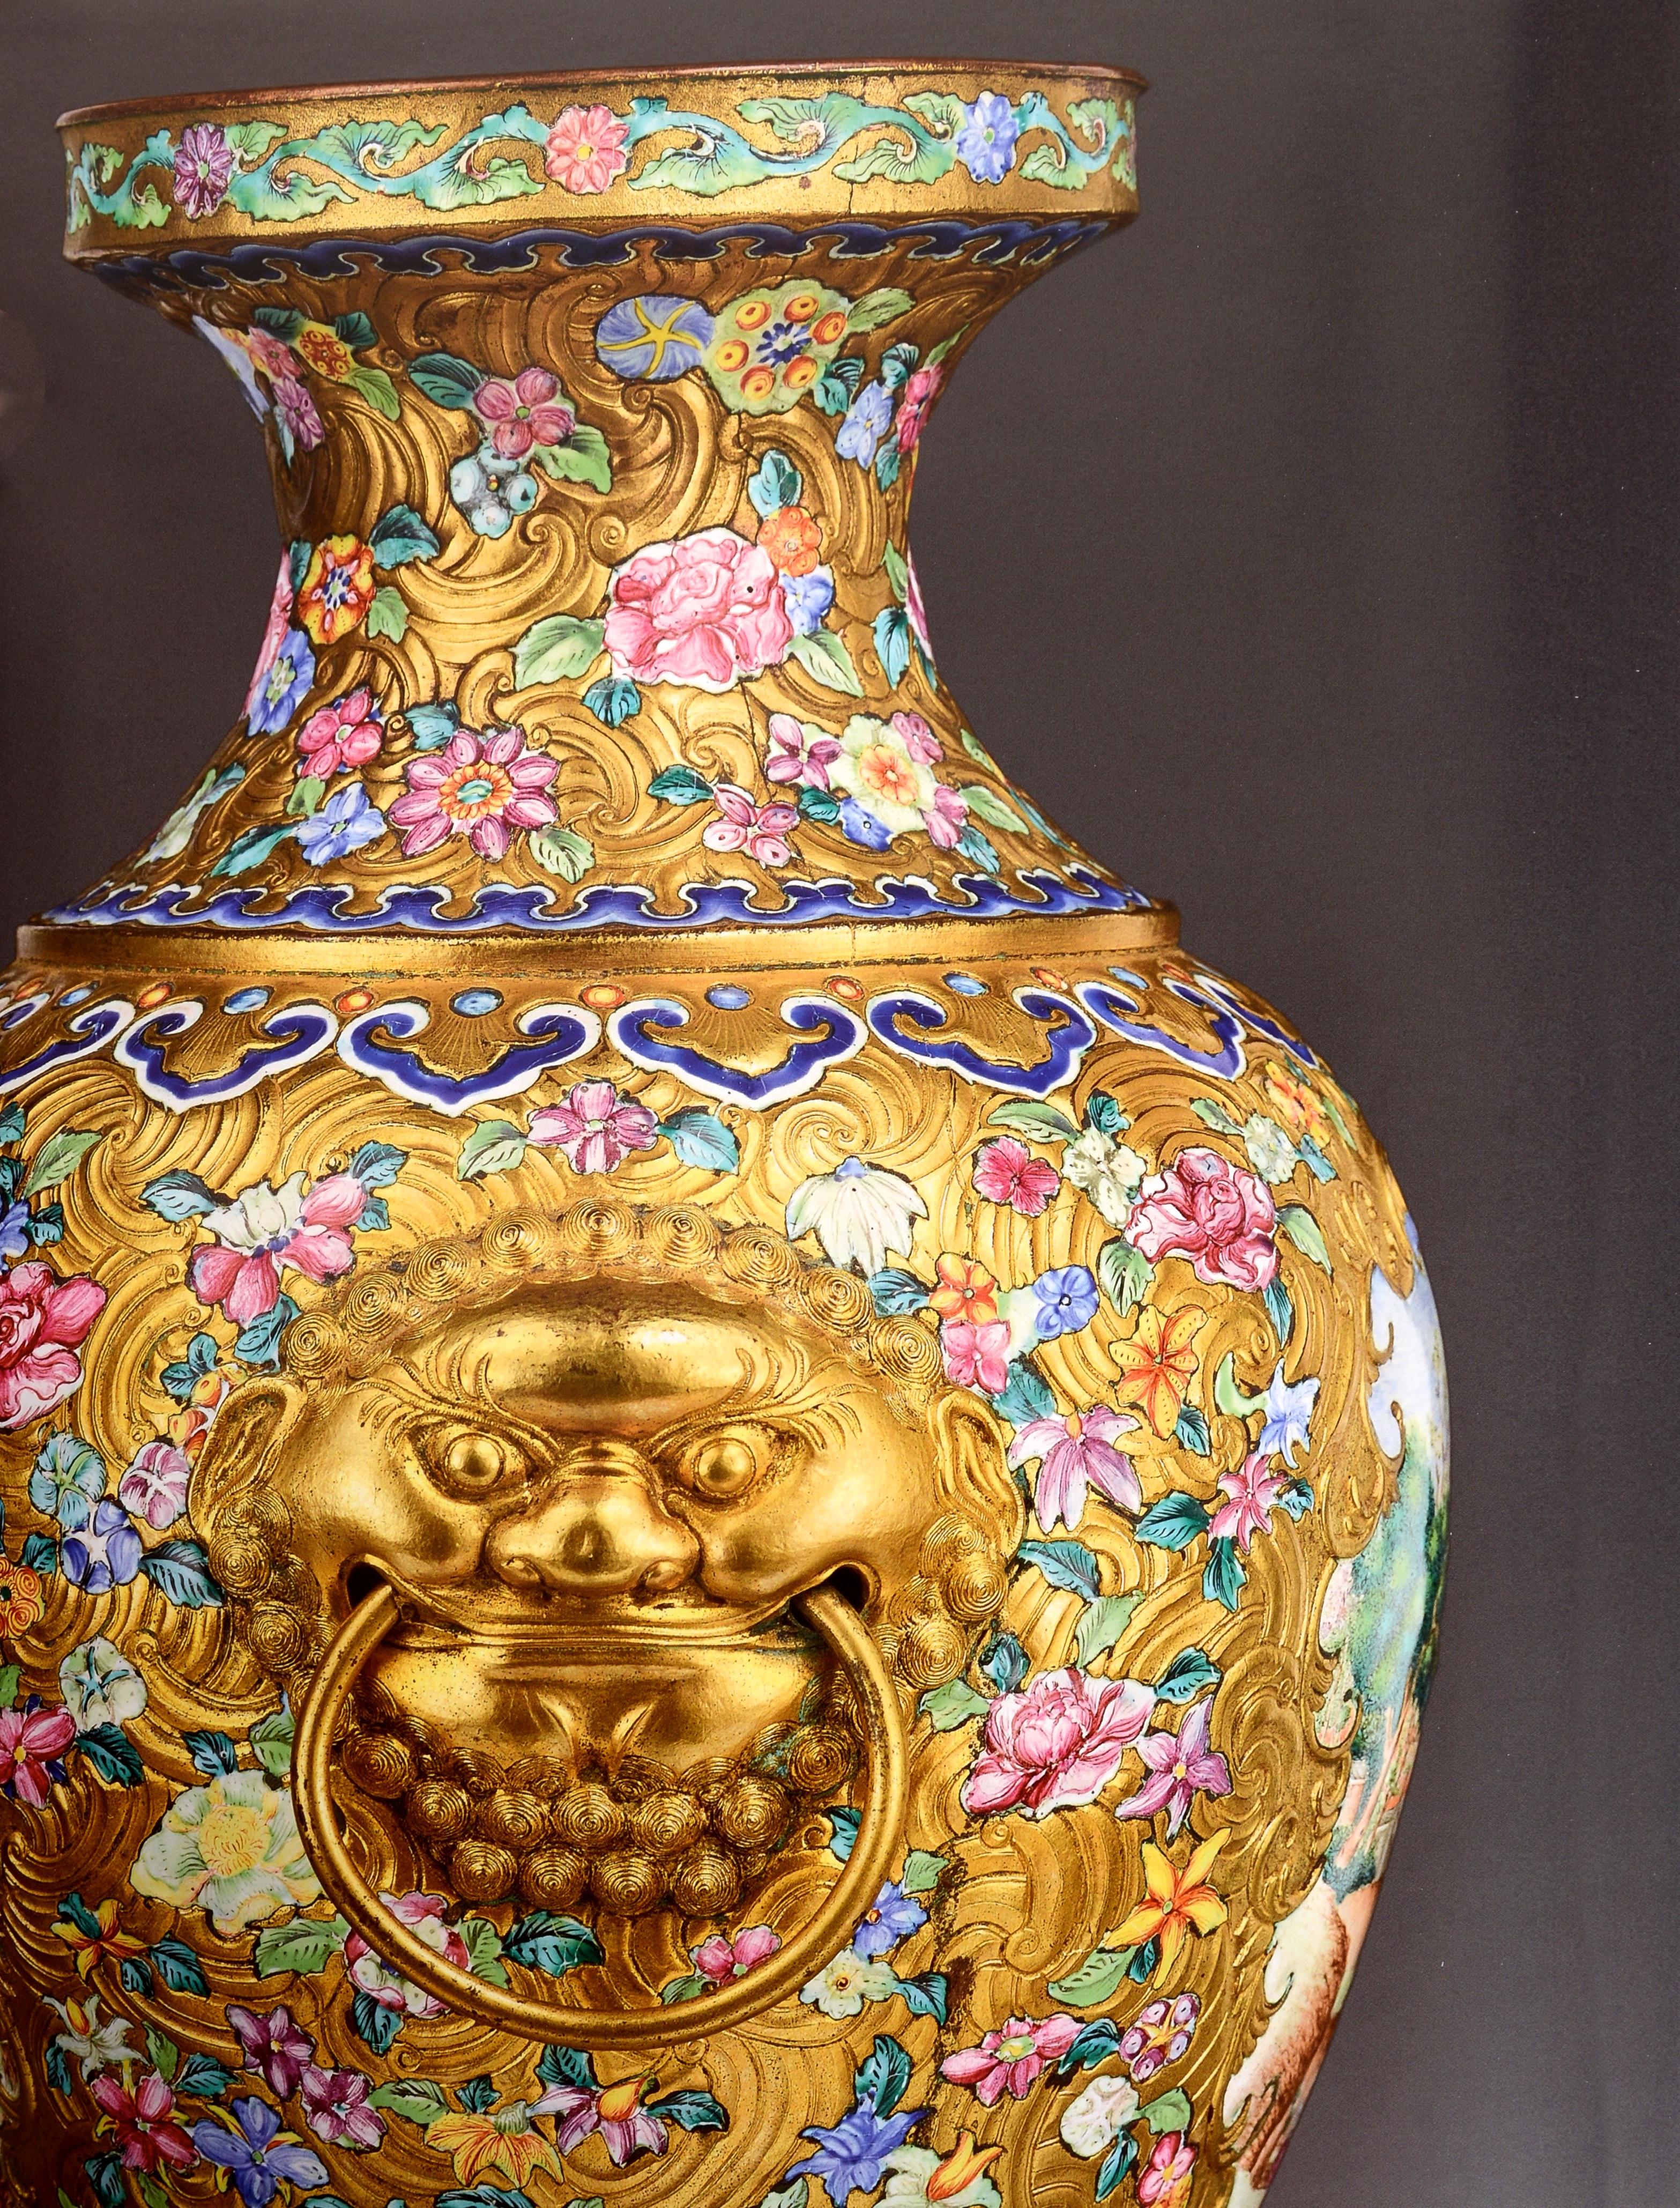 Sotheby's Hong Kong Important Private Collection Chinese Ceramics October 8, 2019. 1st Ed hardcover. Includes rare examples of Ming and Qing porcelain and several exceptional jades. Sir Q.W. Lee was a banker and philanthropist well-known for his